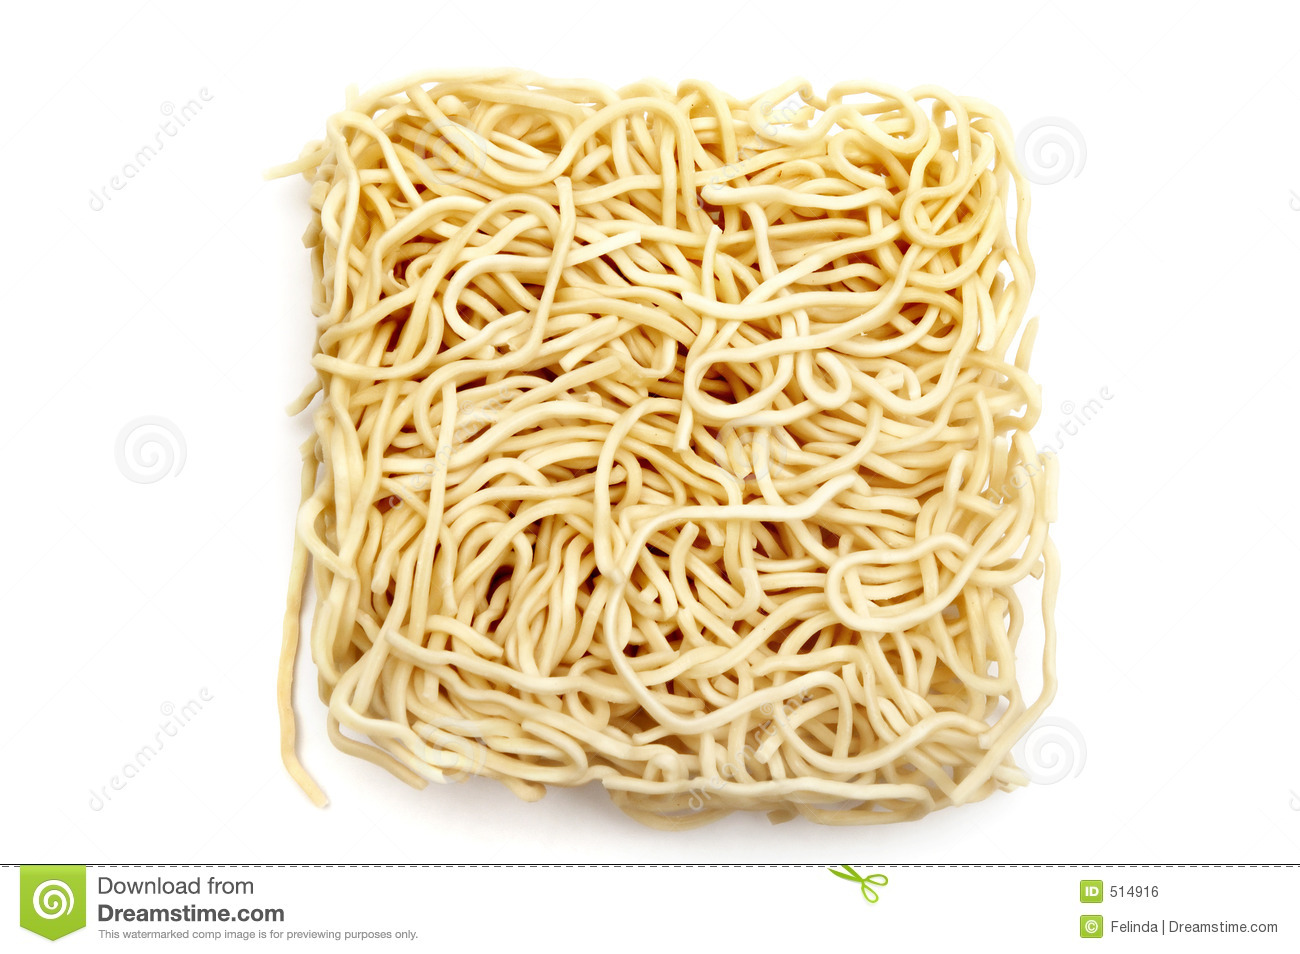 Asian Noodles Royalty Free Stock Image   Image  514916